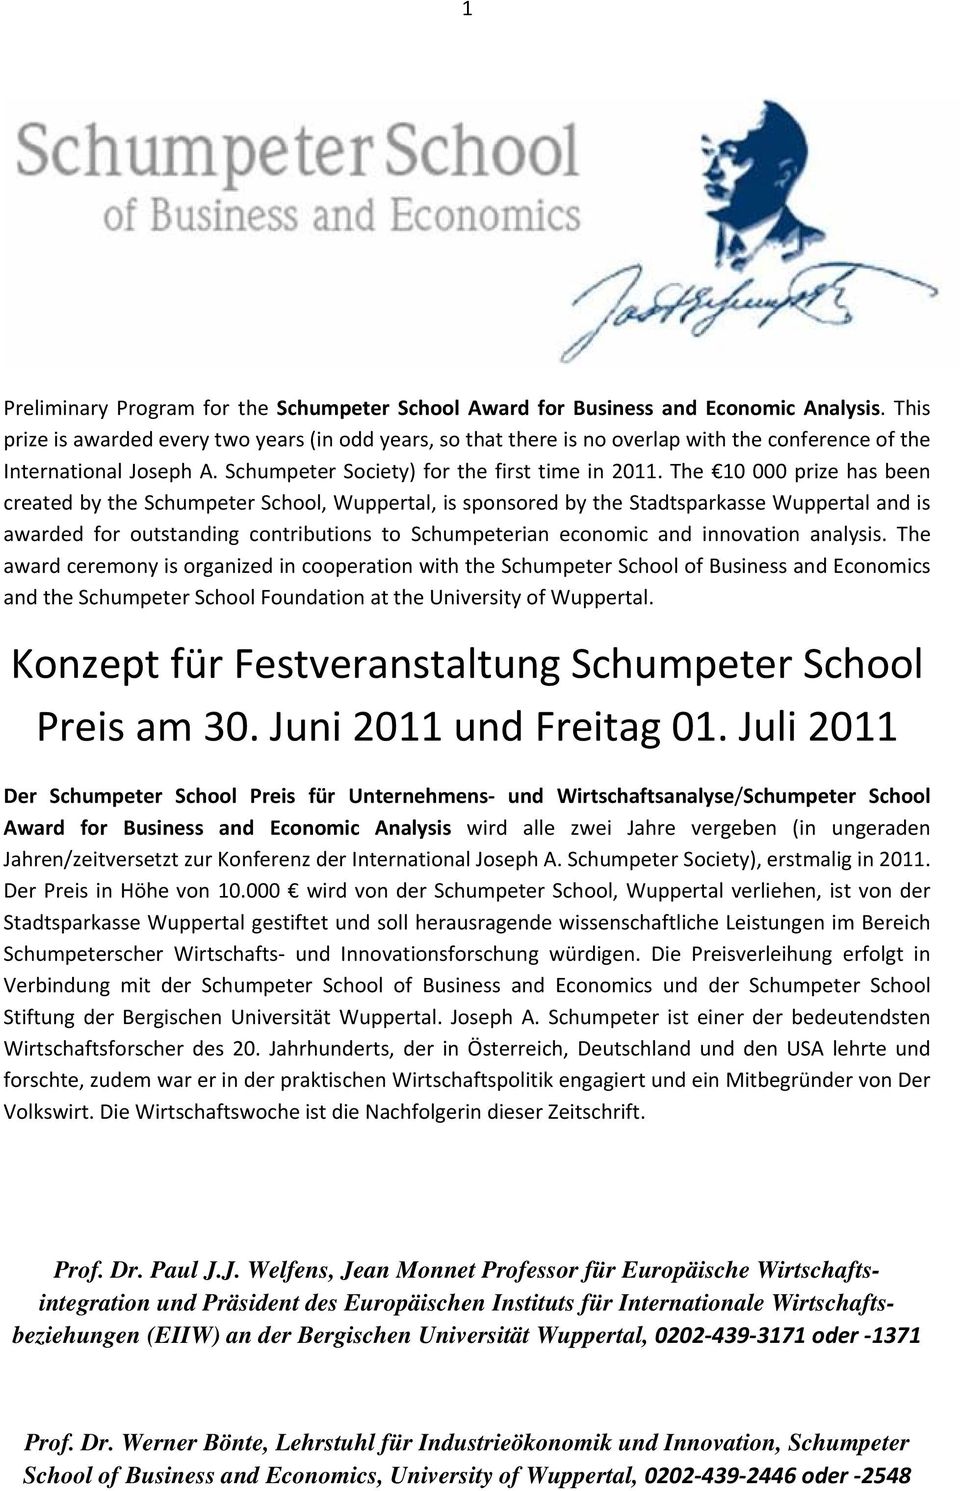 The 10 000 prize has been created by the Schumpeter School, Wuppertal, is sponsored by the Stadtsparkasse Wuppertal and is awarded for outstanding contributions to Schumpeterian economic and